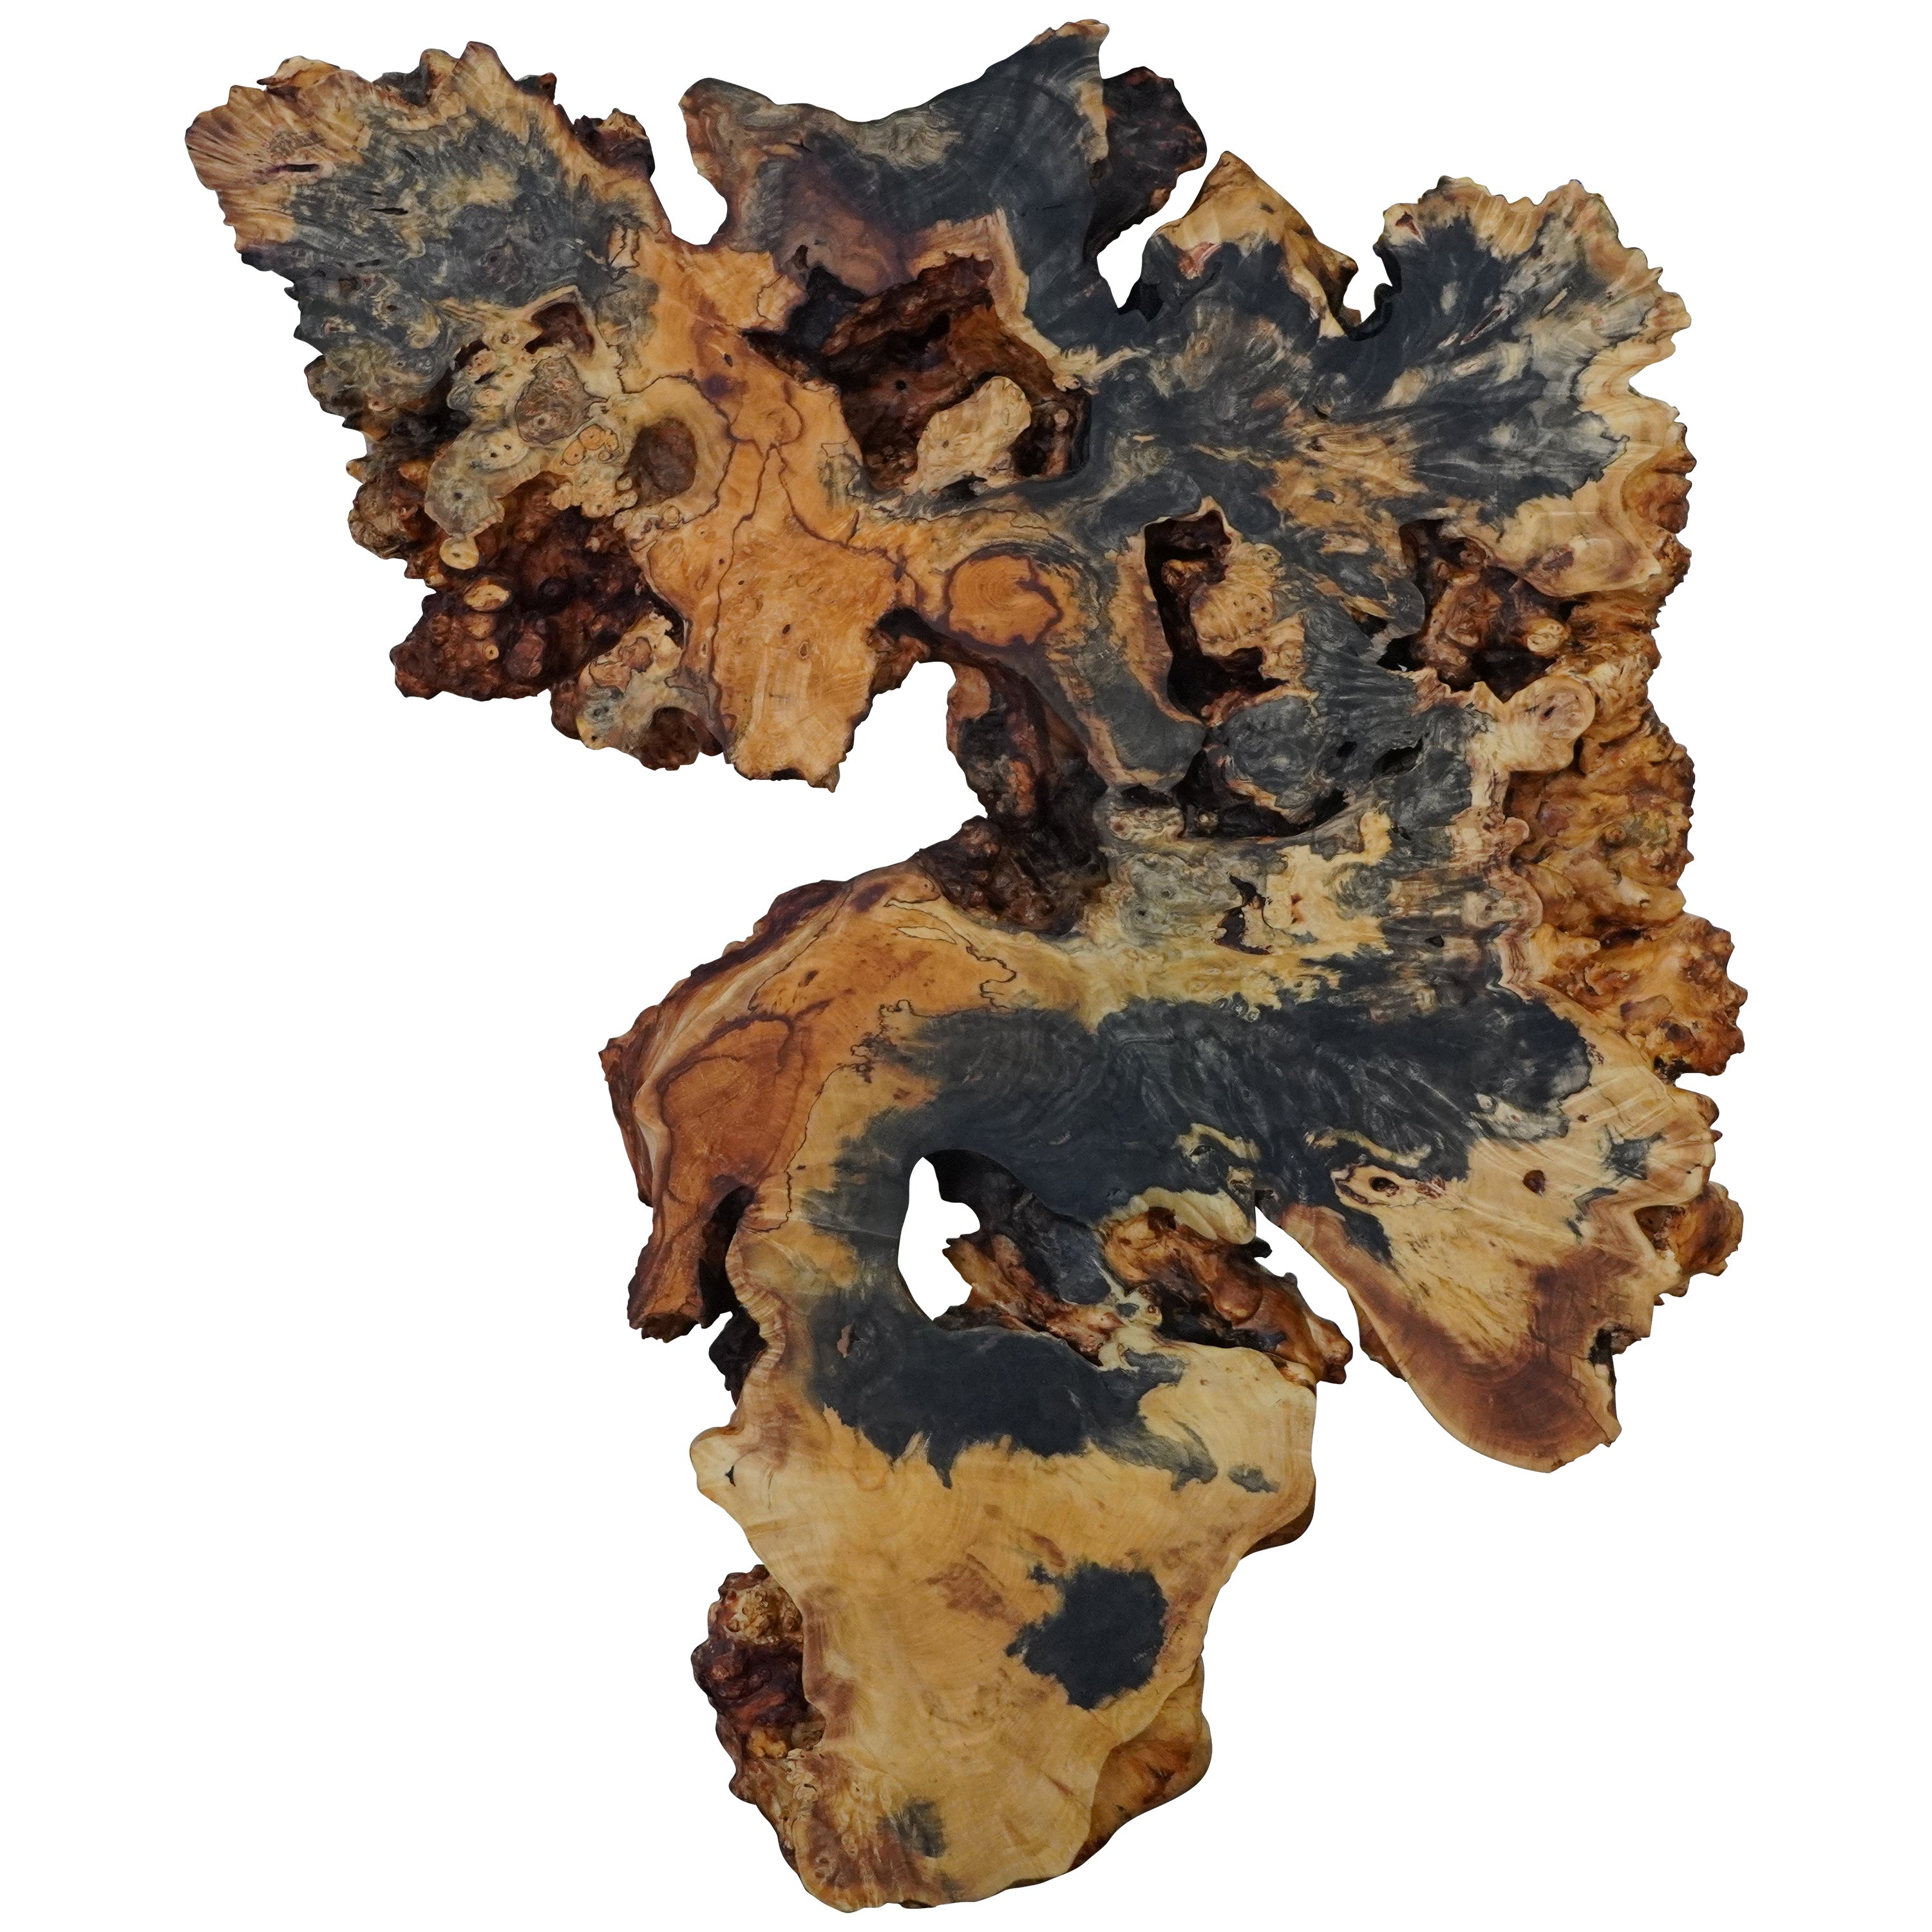 Buckeye Burl is a tumor growth on the root system underground of a Buckeye tree from the upper Northwest of the continental US. It's stunning color variations come from the sediment the tree grows around. Making each section of this truly rare burl